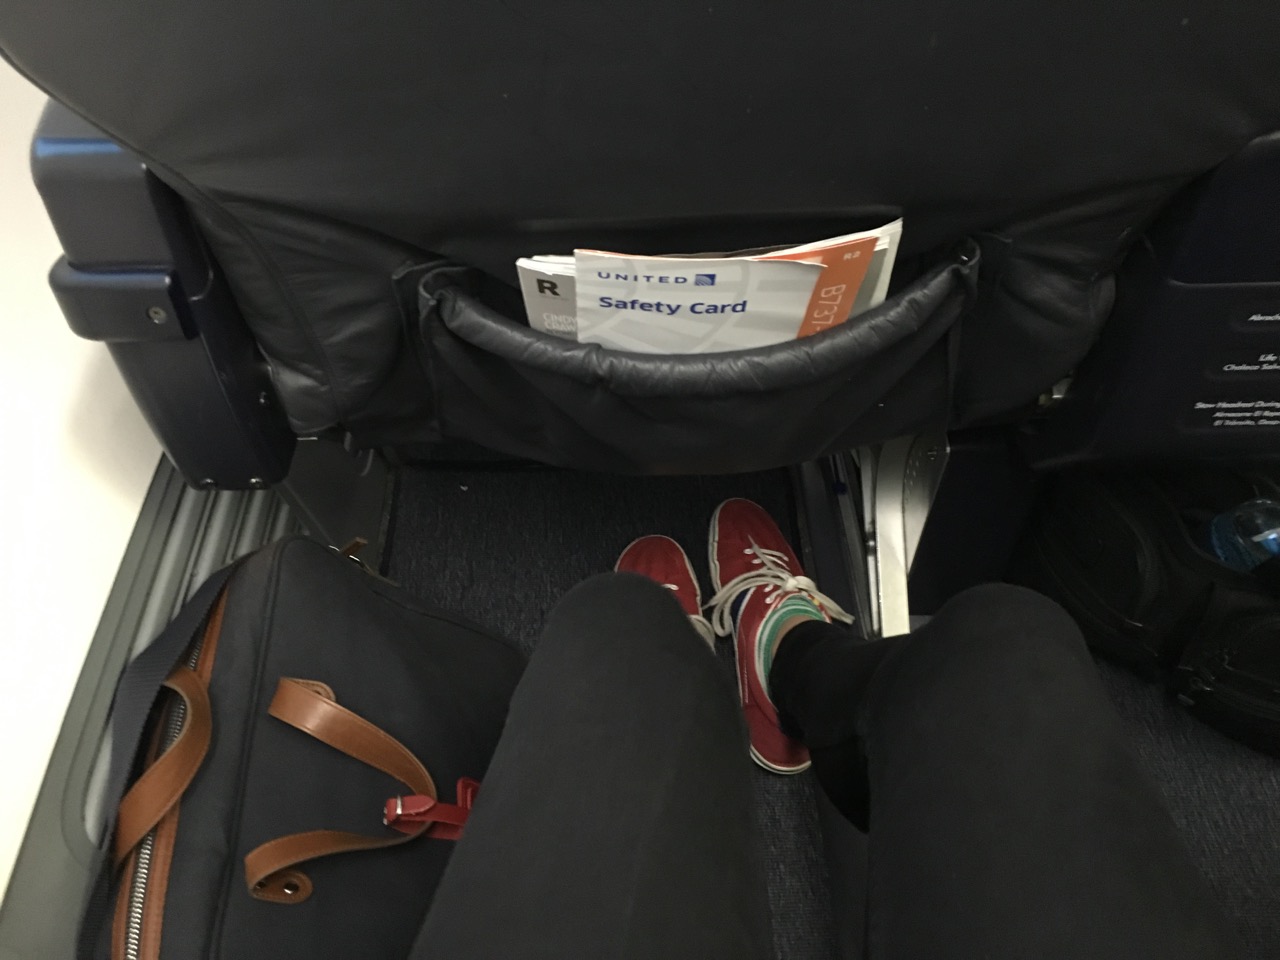 Sussing Out United Airlines' New Seats – Chicago Magazine